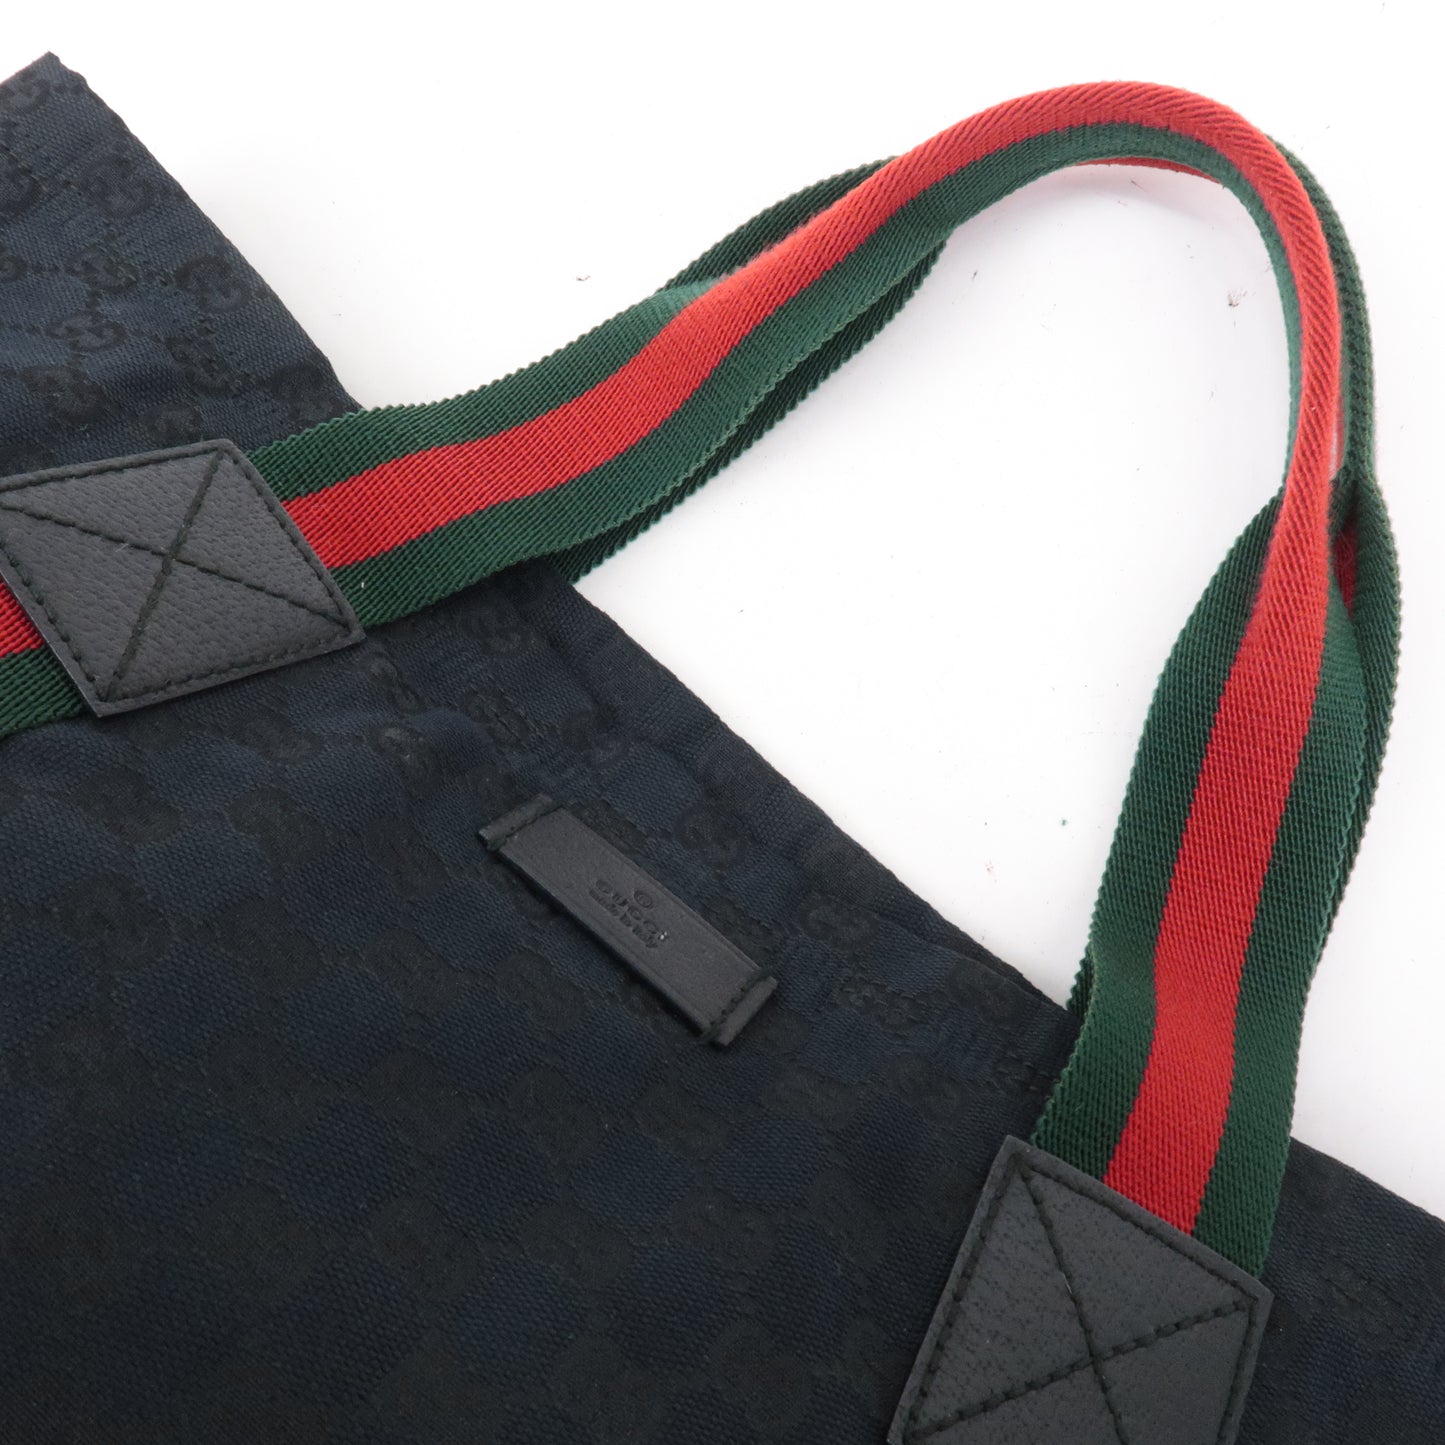 GUCCI Sherry GG Canvas Leather Tote Bag Hand Bag Black 189669